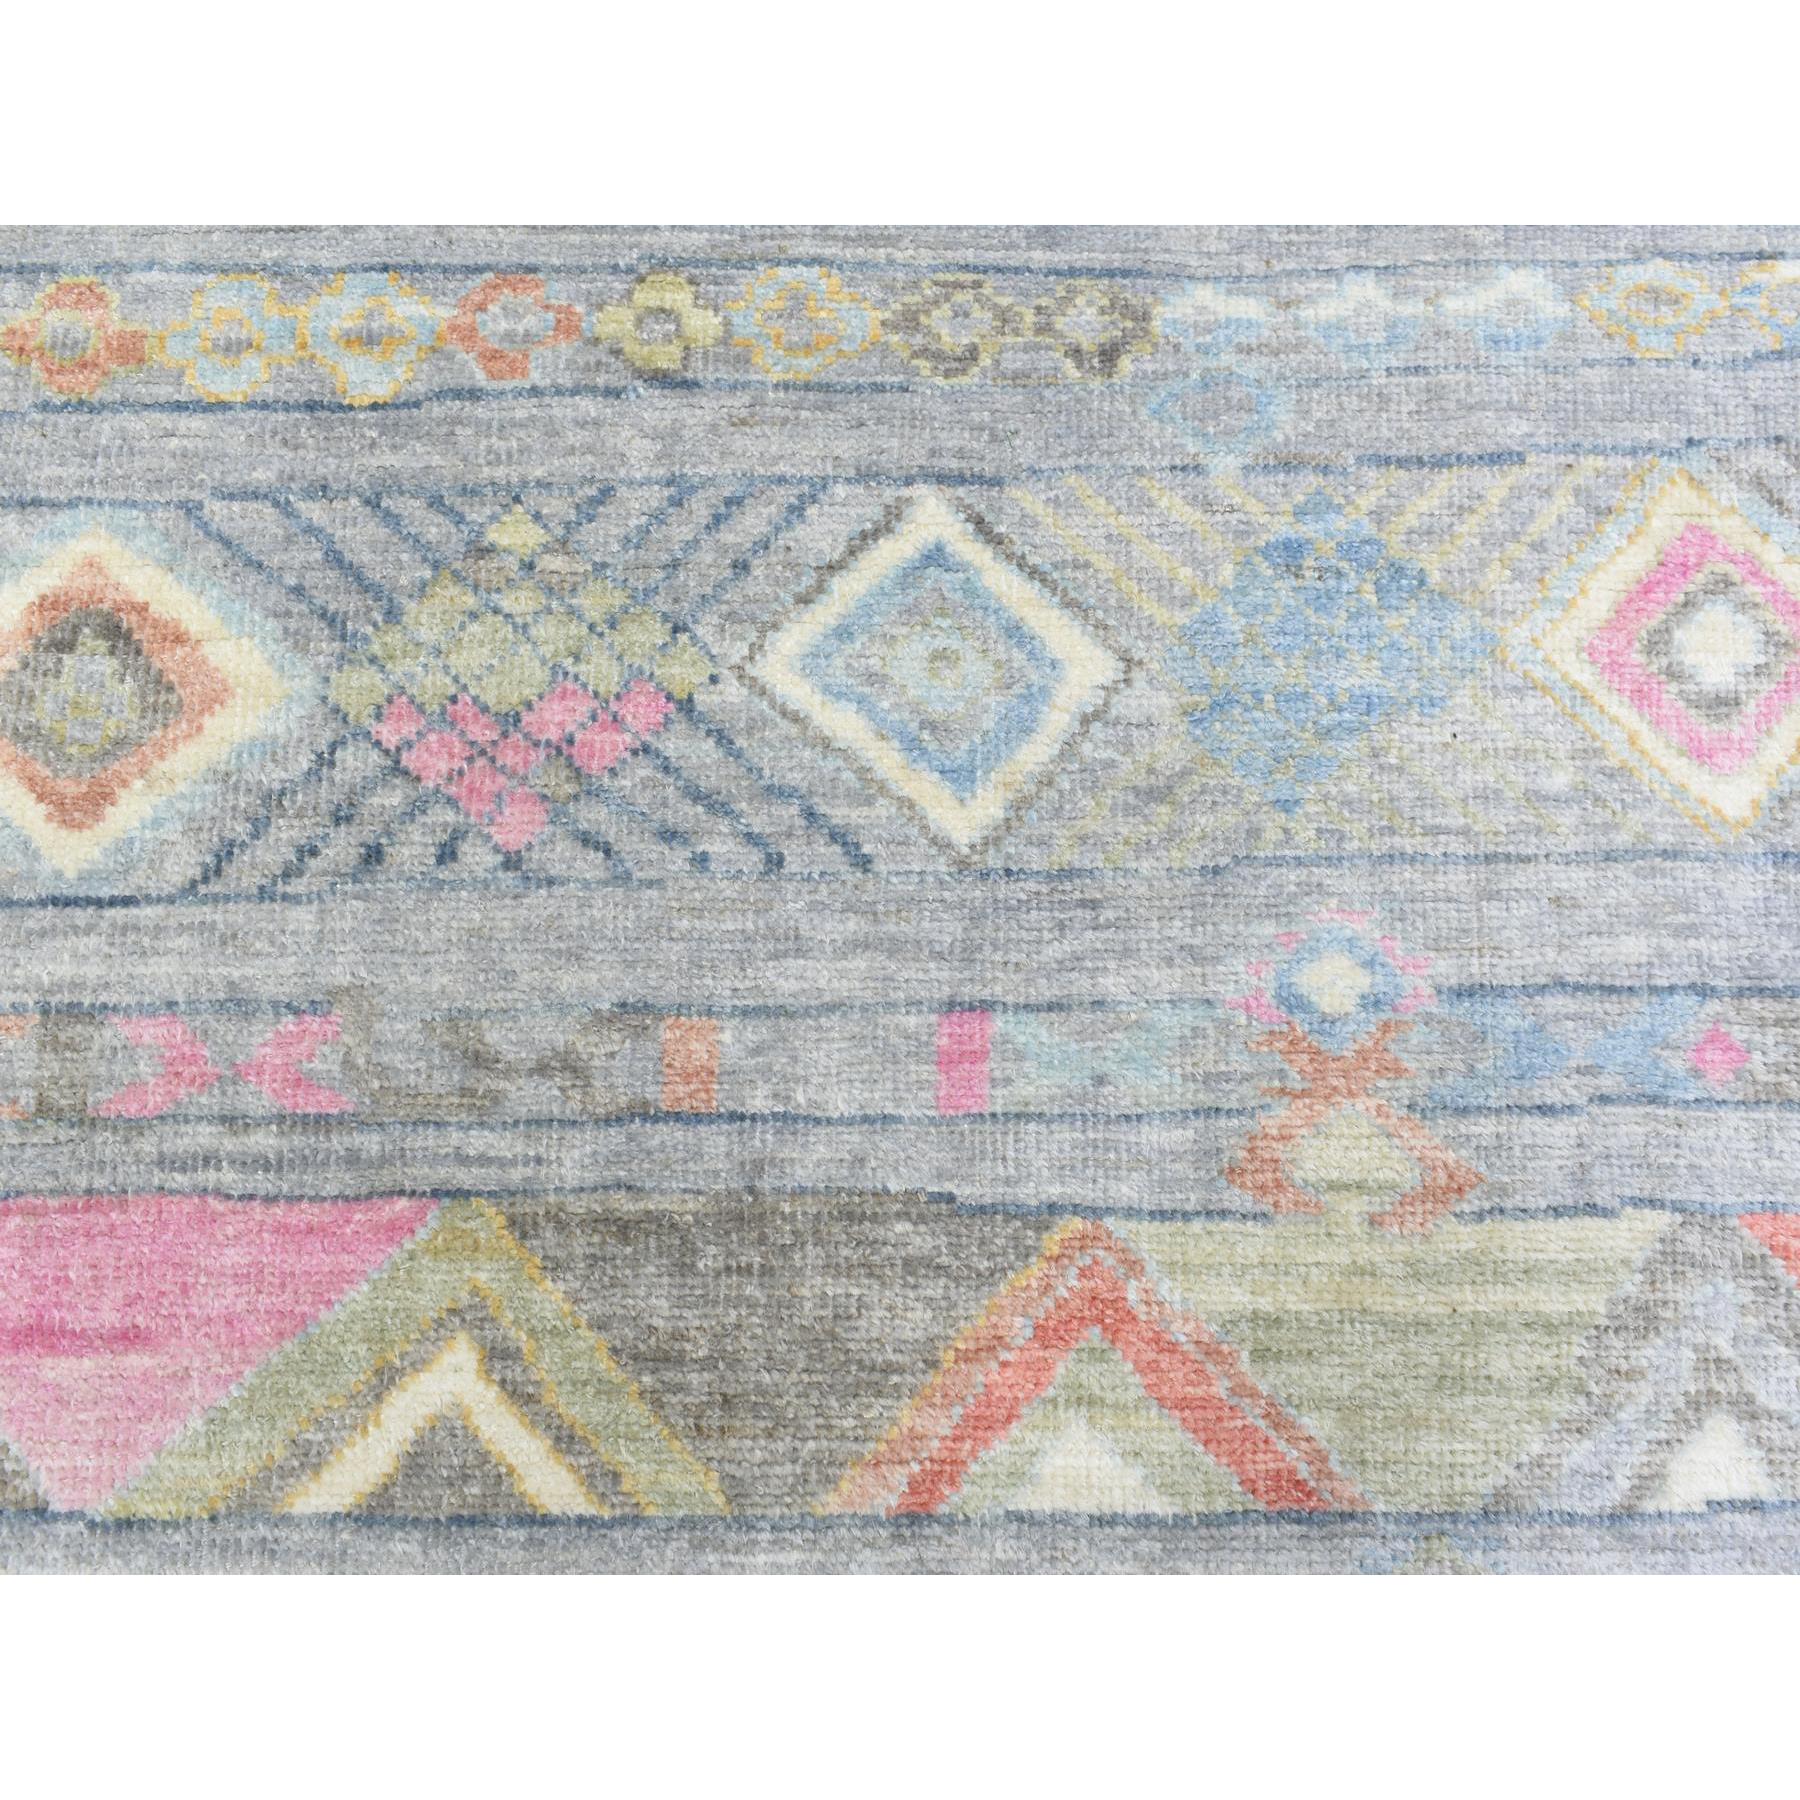 9'1"x11'8" Gray, Hand Woven Anatolian Village Inspired With Small Triangular Design, Natural Wool, Runner Oriental Rug 